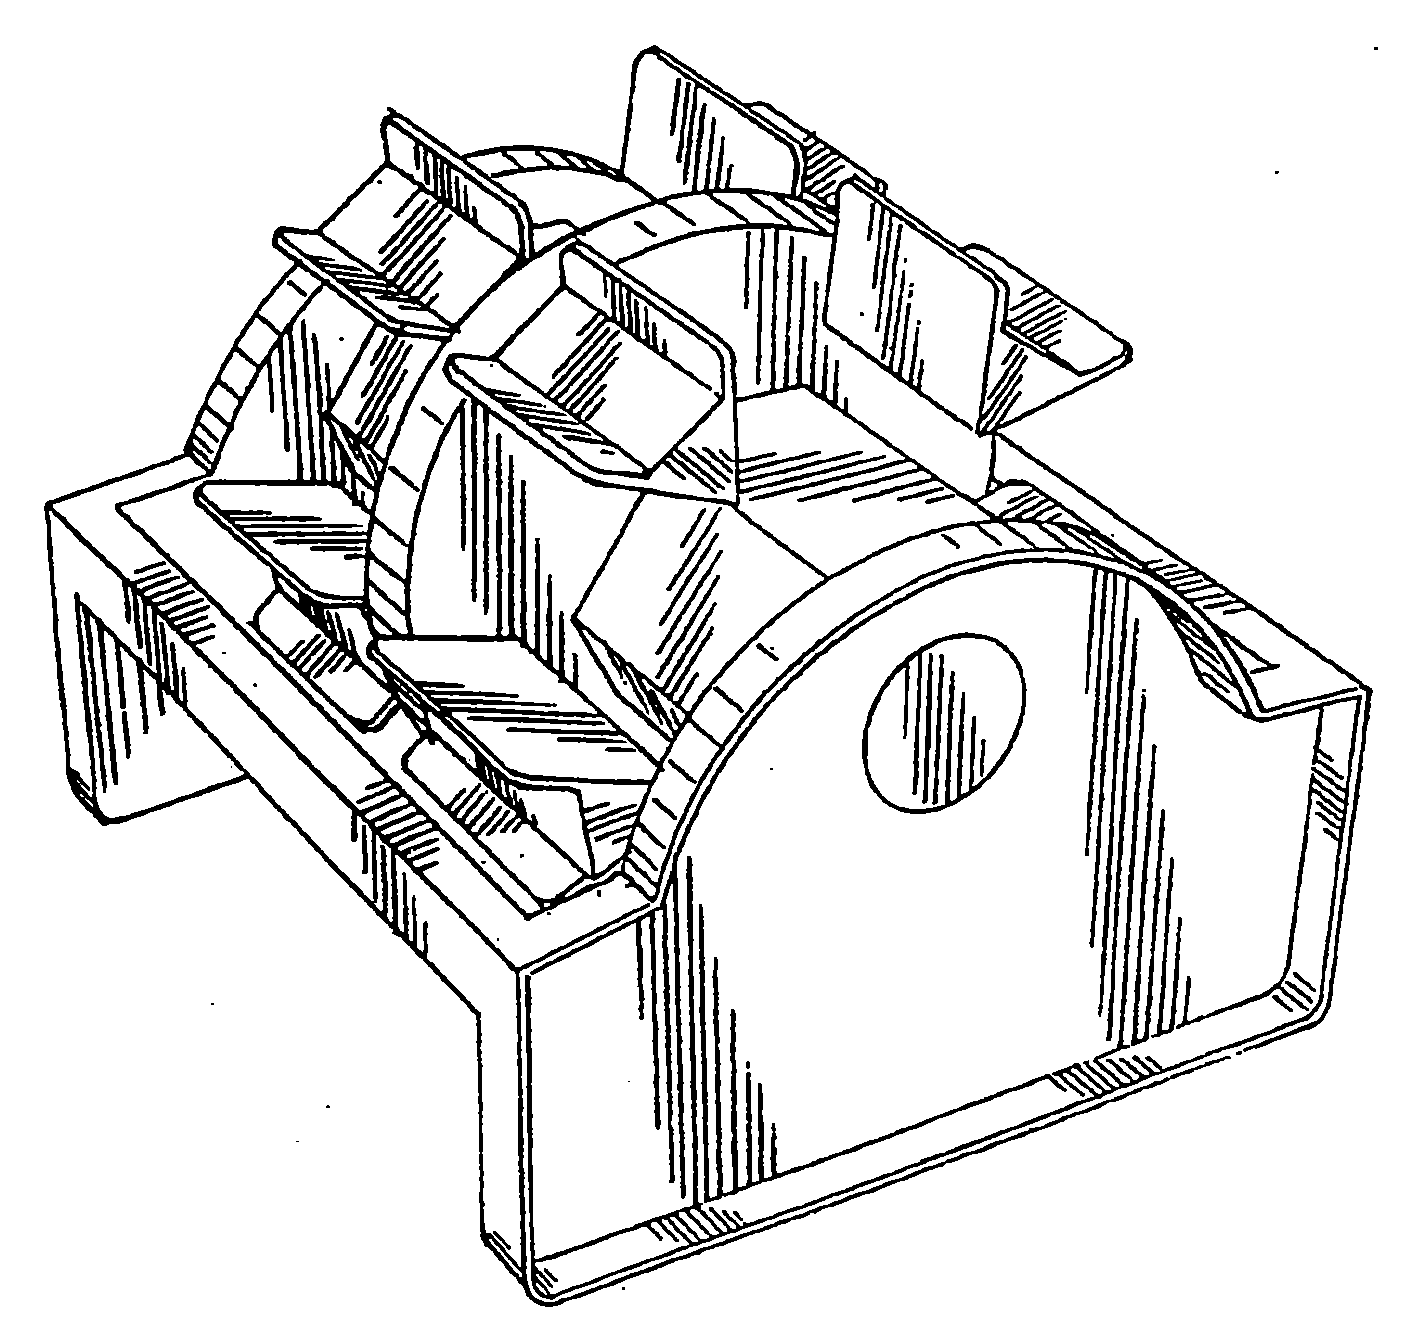 Example of a design for a condiment holder that rotates ona horizontal axis.
